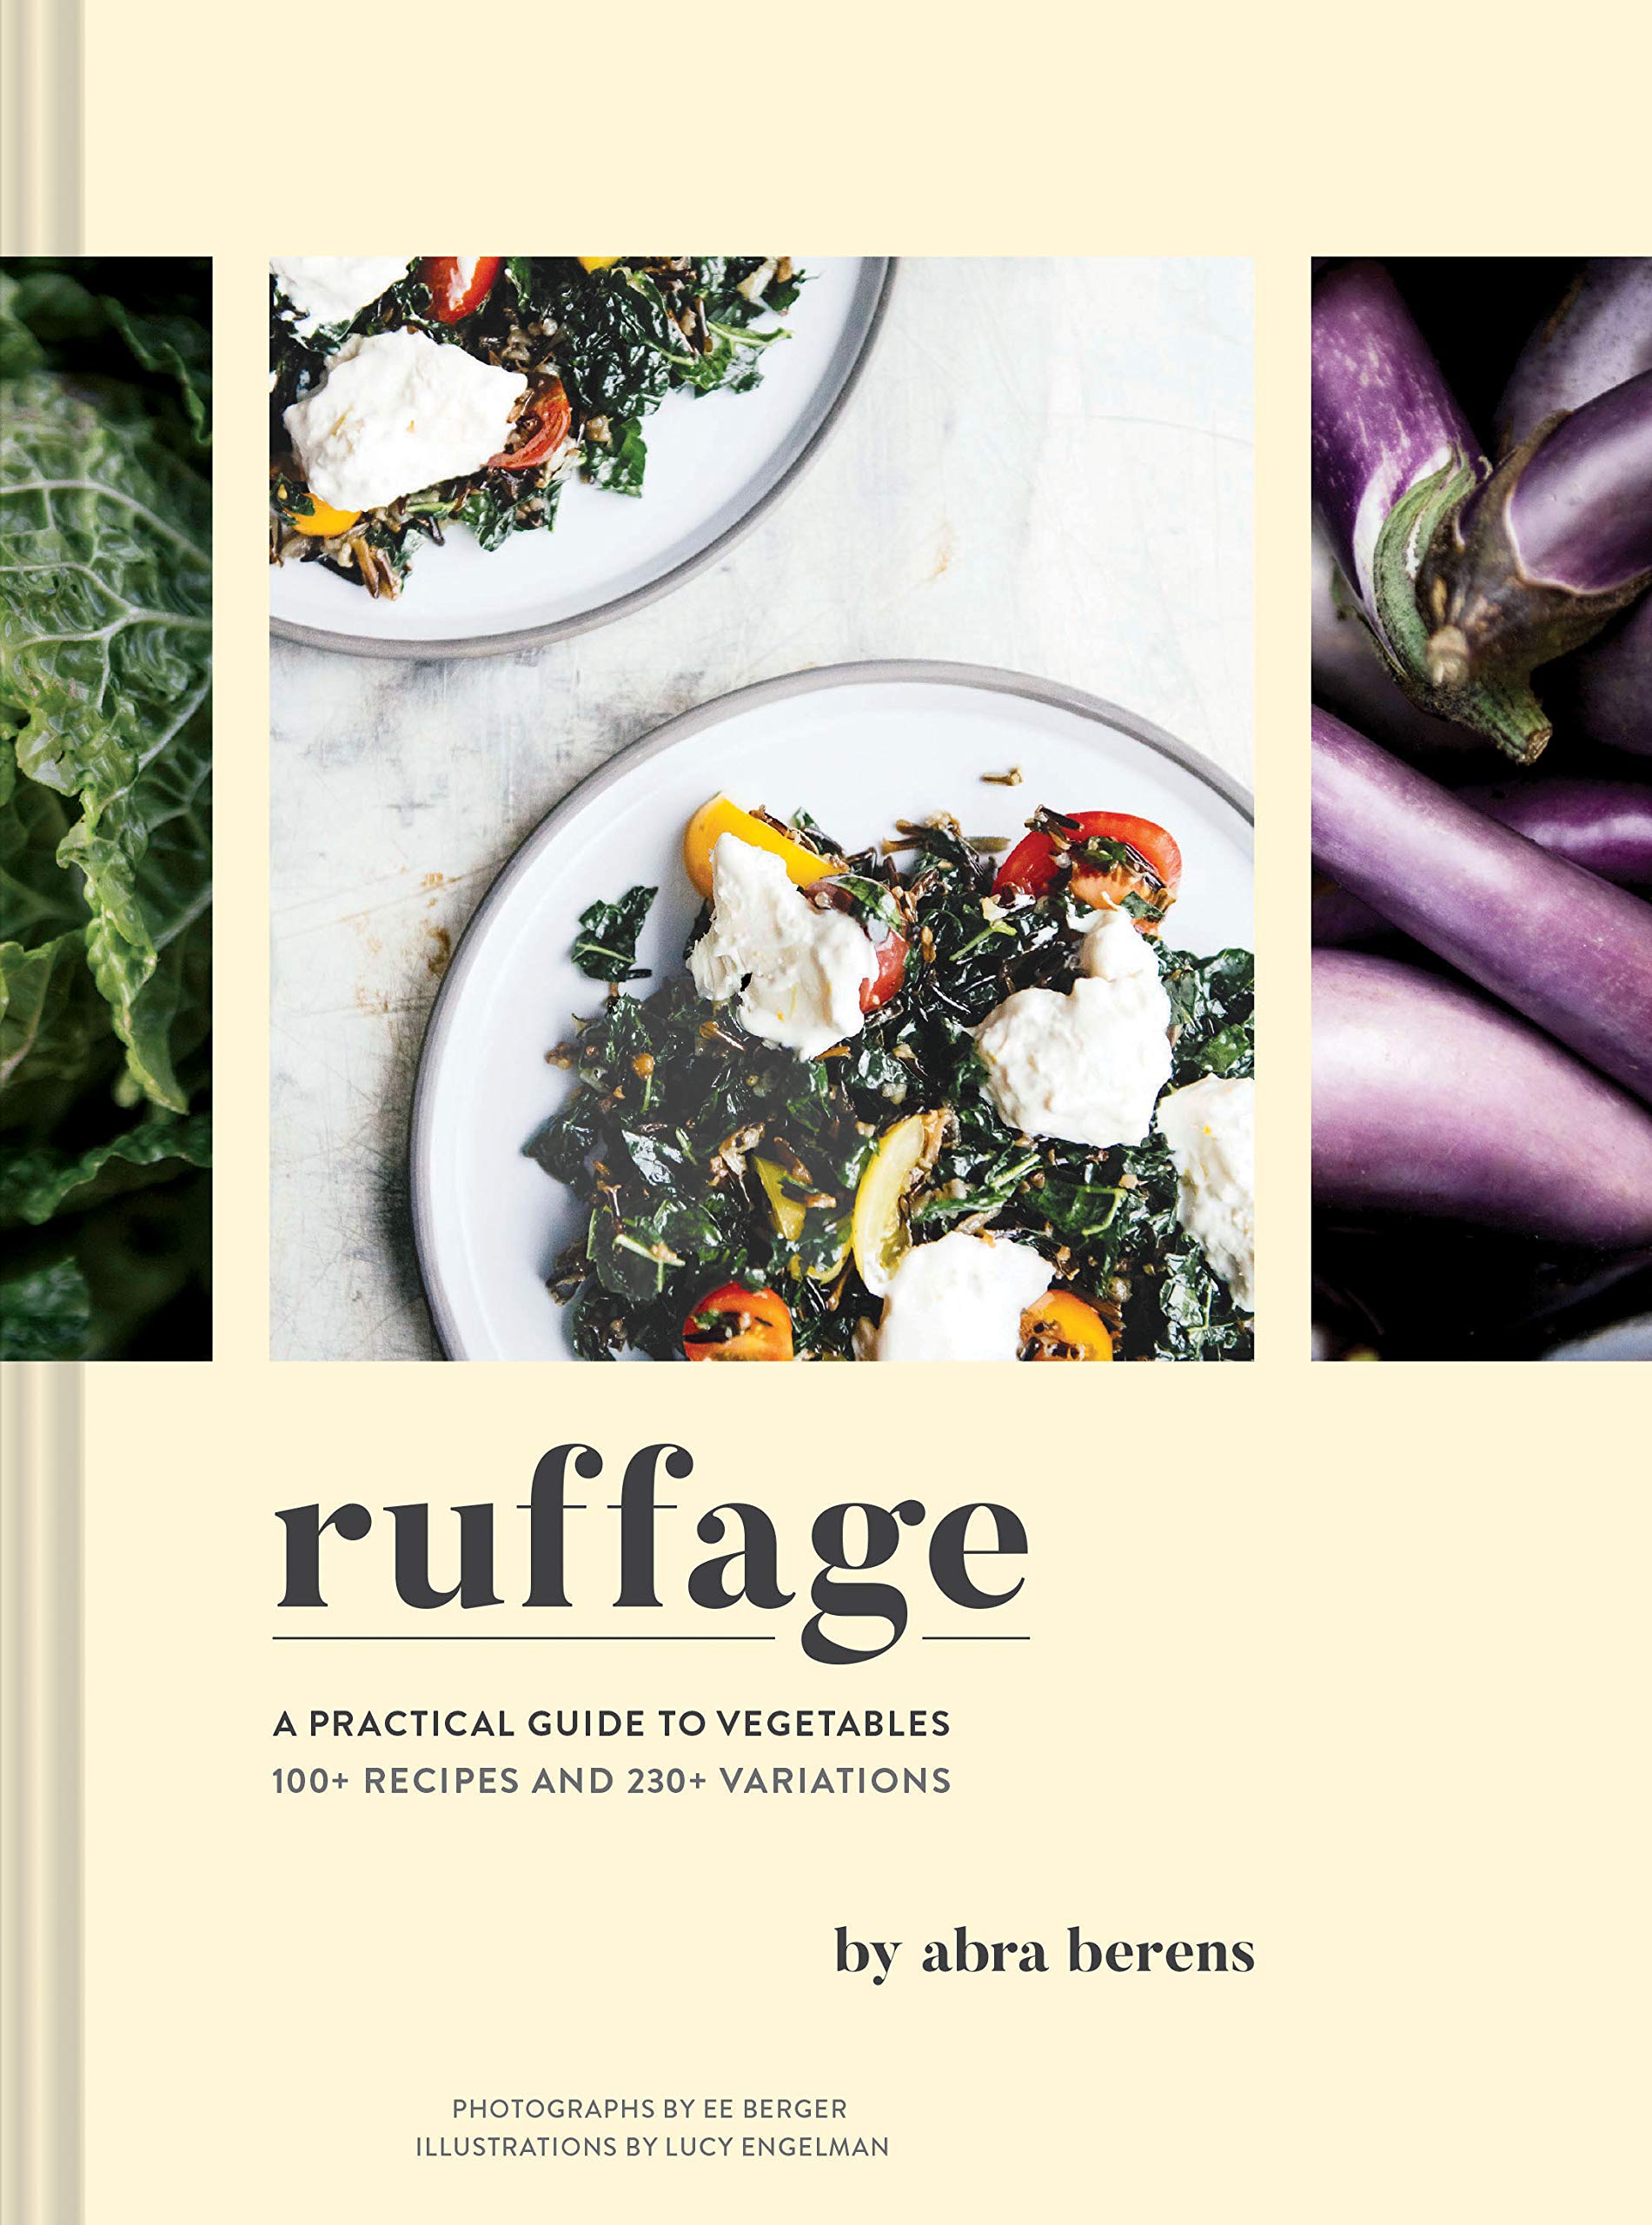 Ruffage: A Practical Guide to Vegetables (Abra Berens)